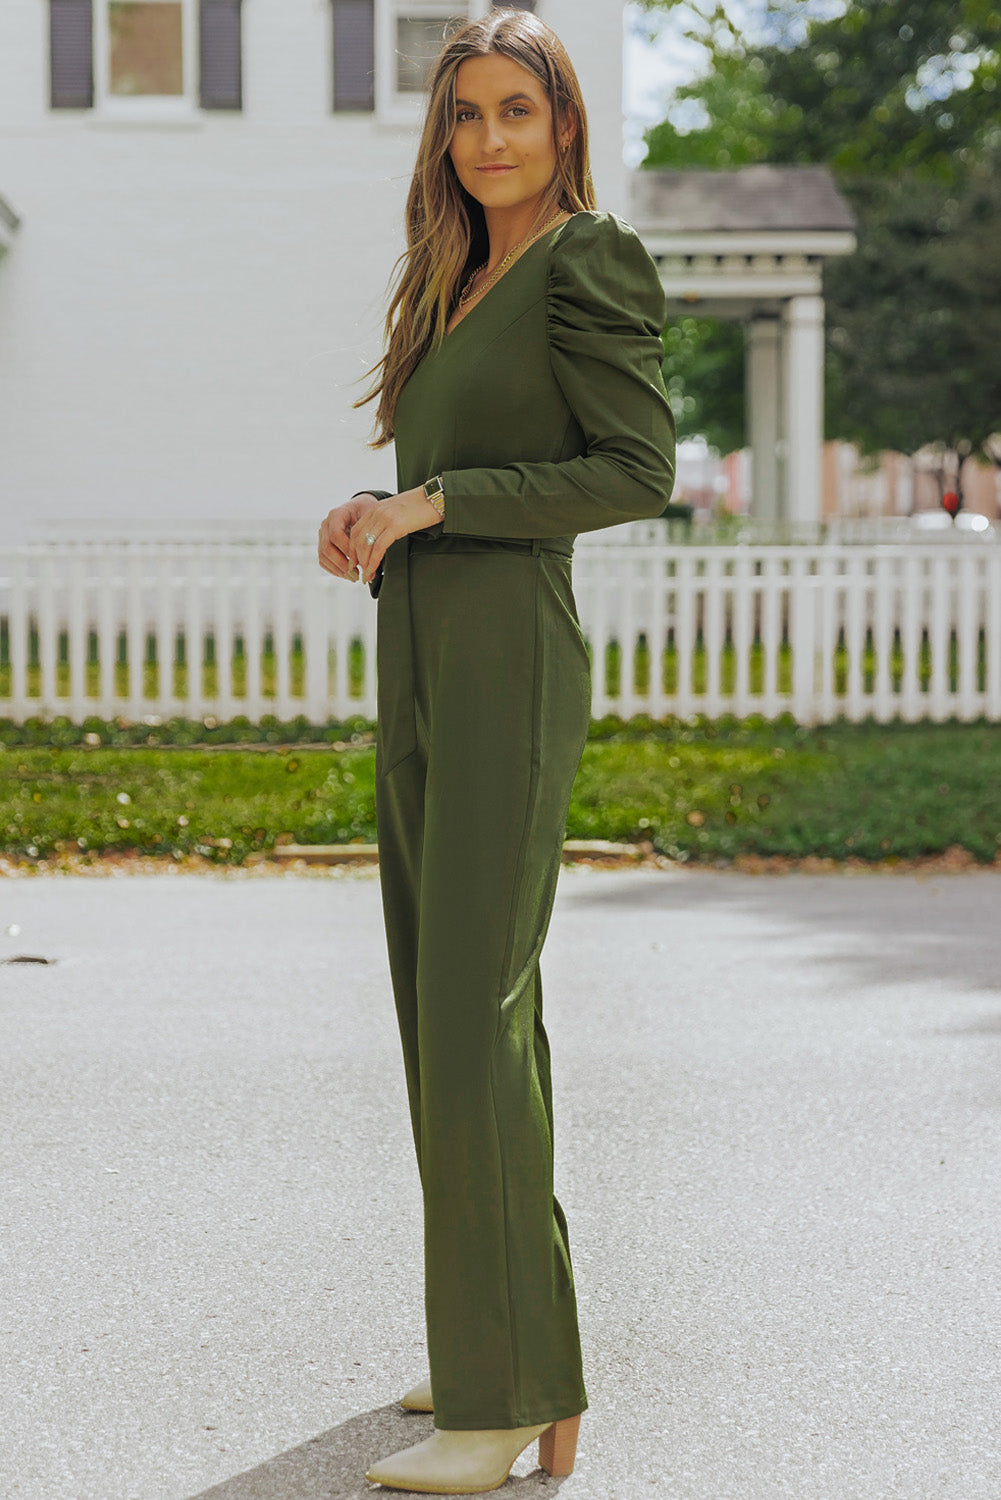 Long Puff Sleeve V-Neck Classic Jumpsuit